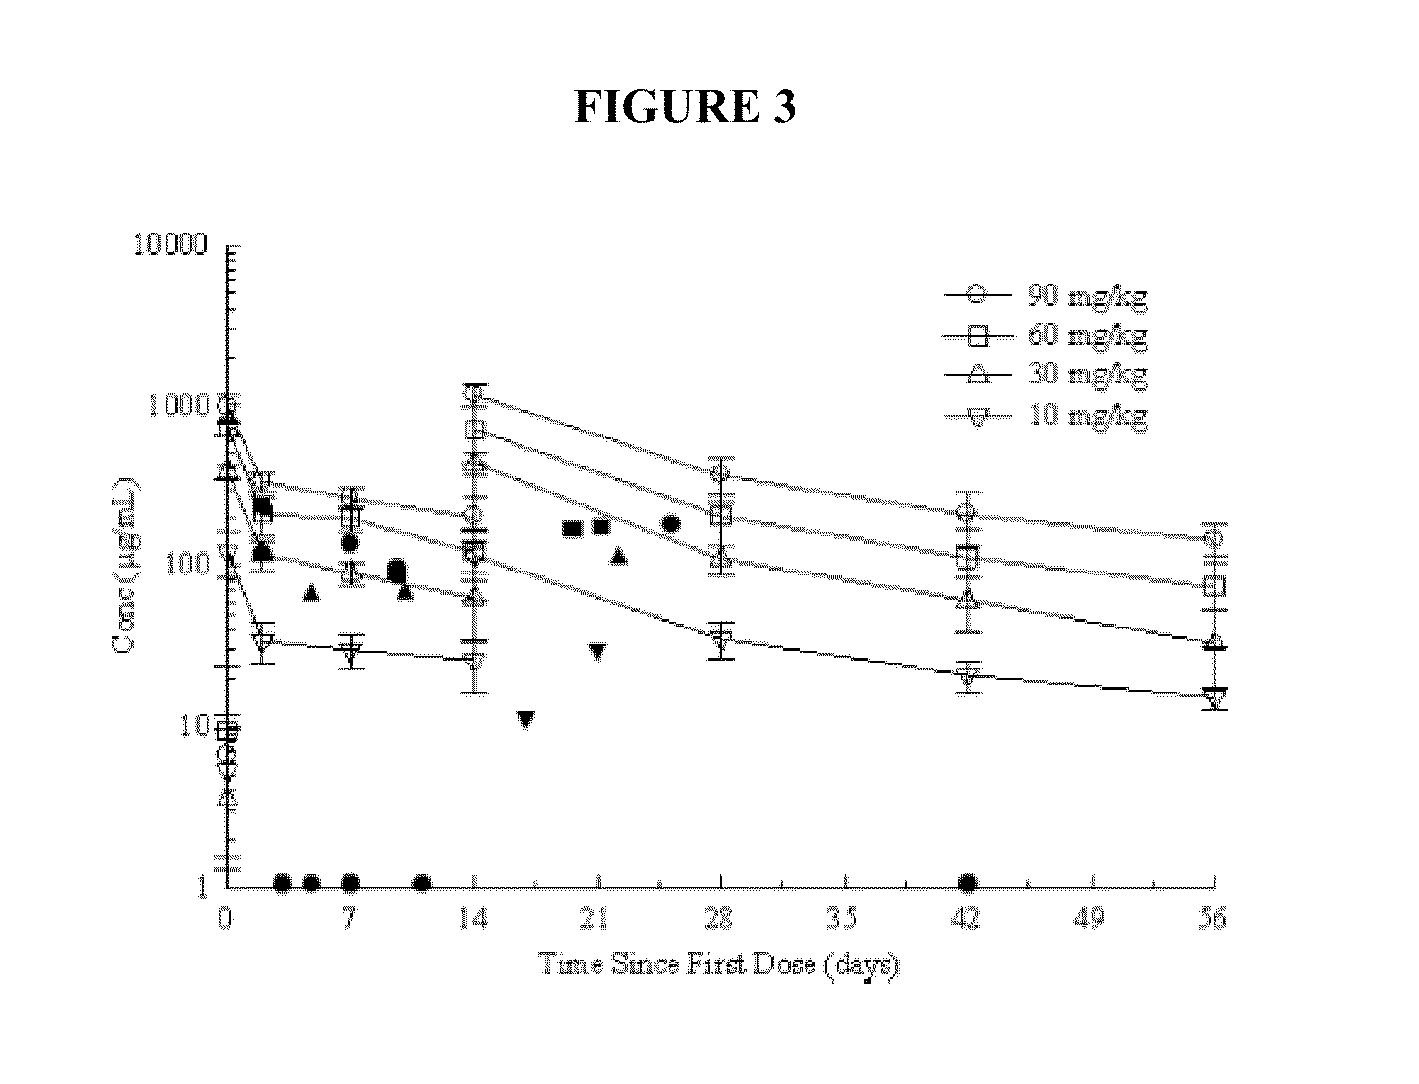 Compositions and methods for prophylactic and therapeutic treatment of infection